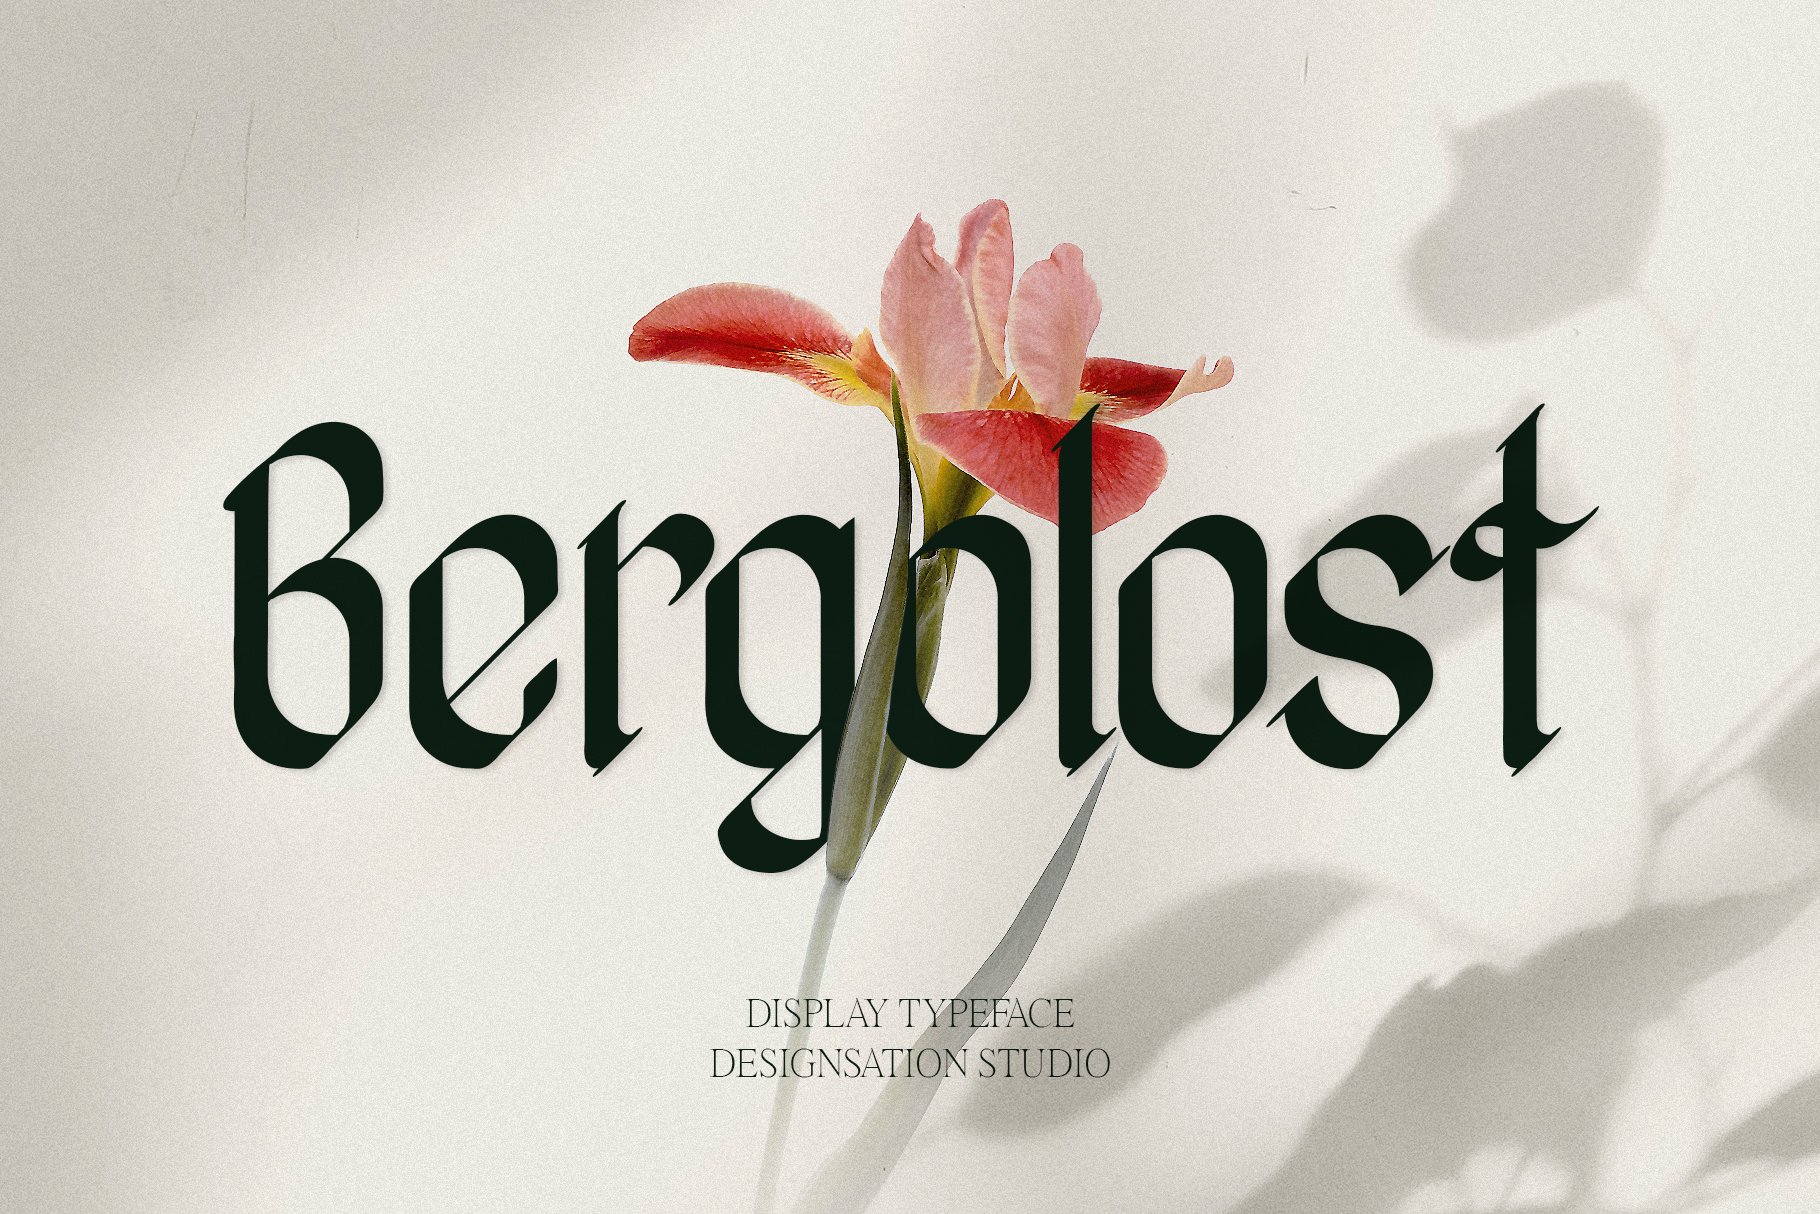 Bergolost Display Typeface cover image.